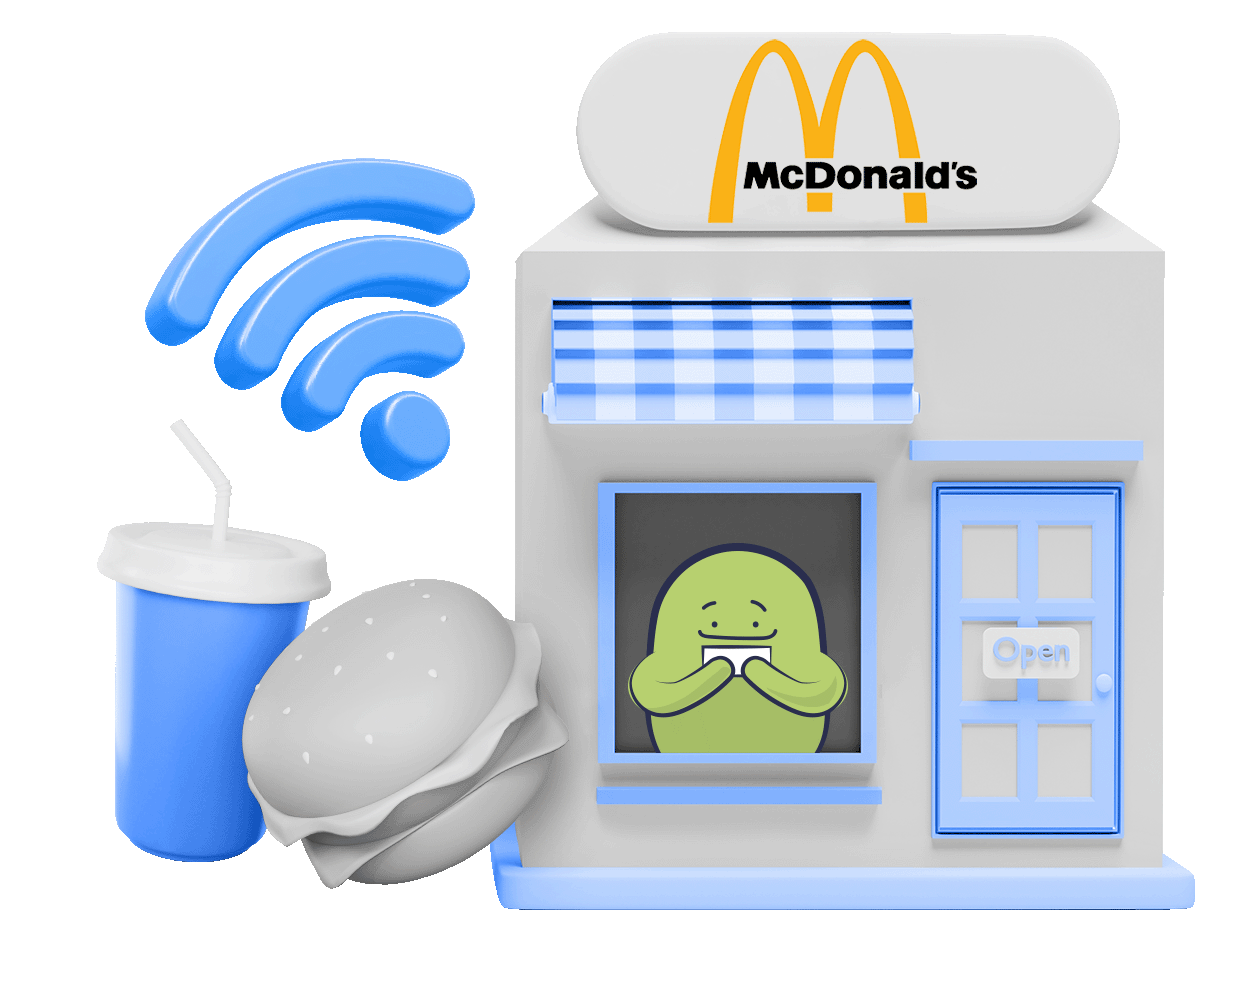 How to connect to McDonald’s WiFi more safely